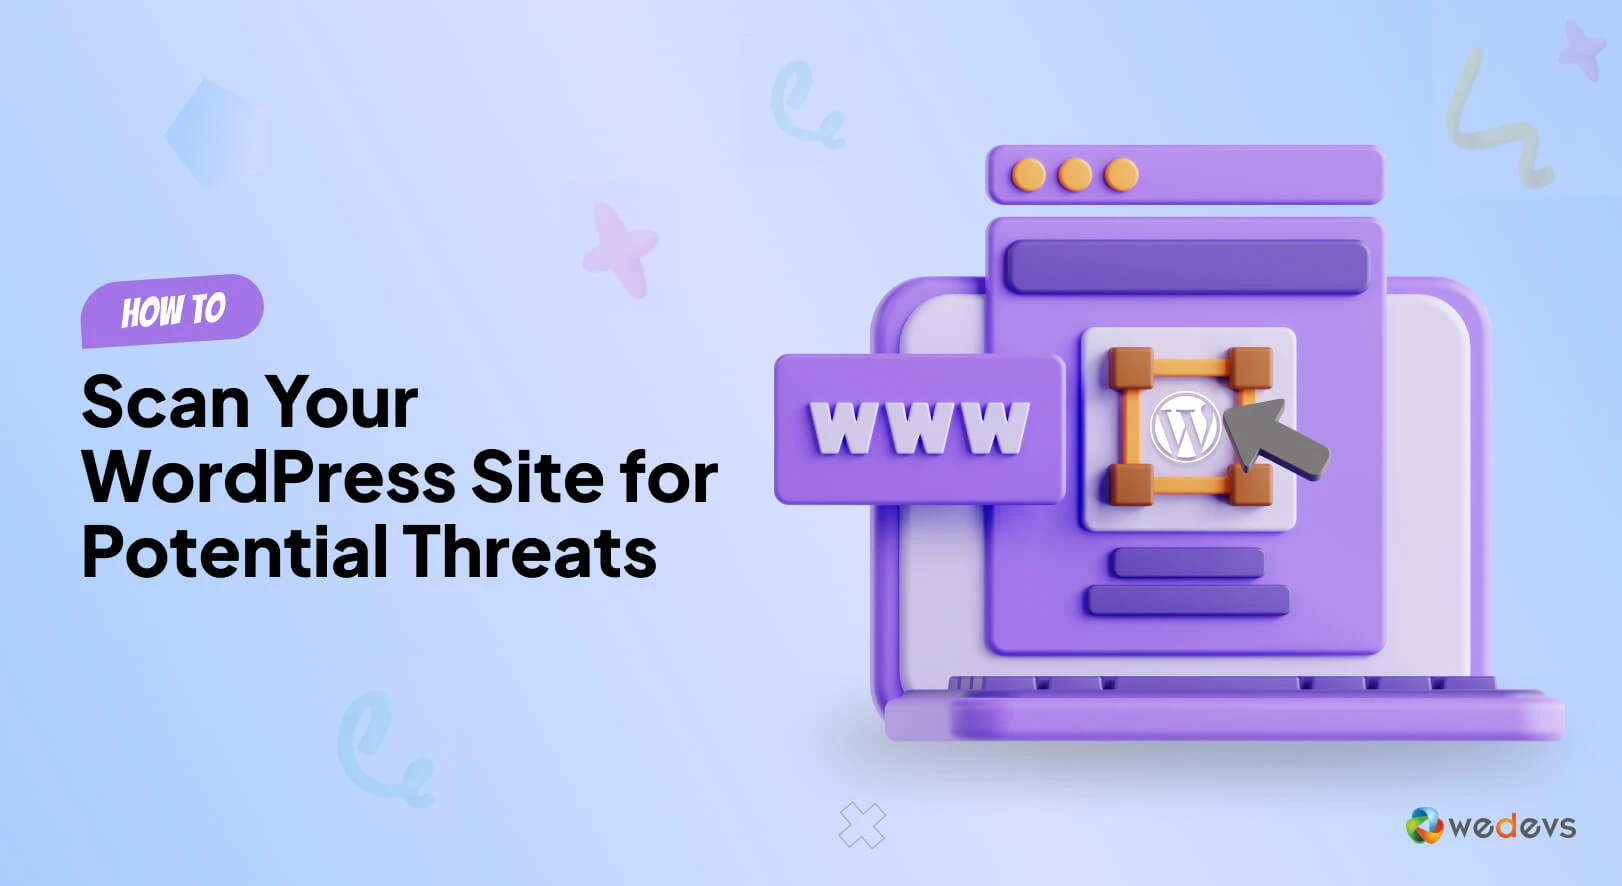 How to Scan Your WordPress Site for Potential Threats with Security Plugins